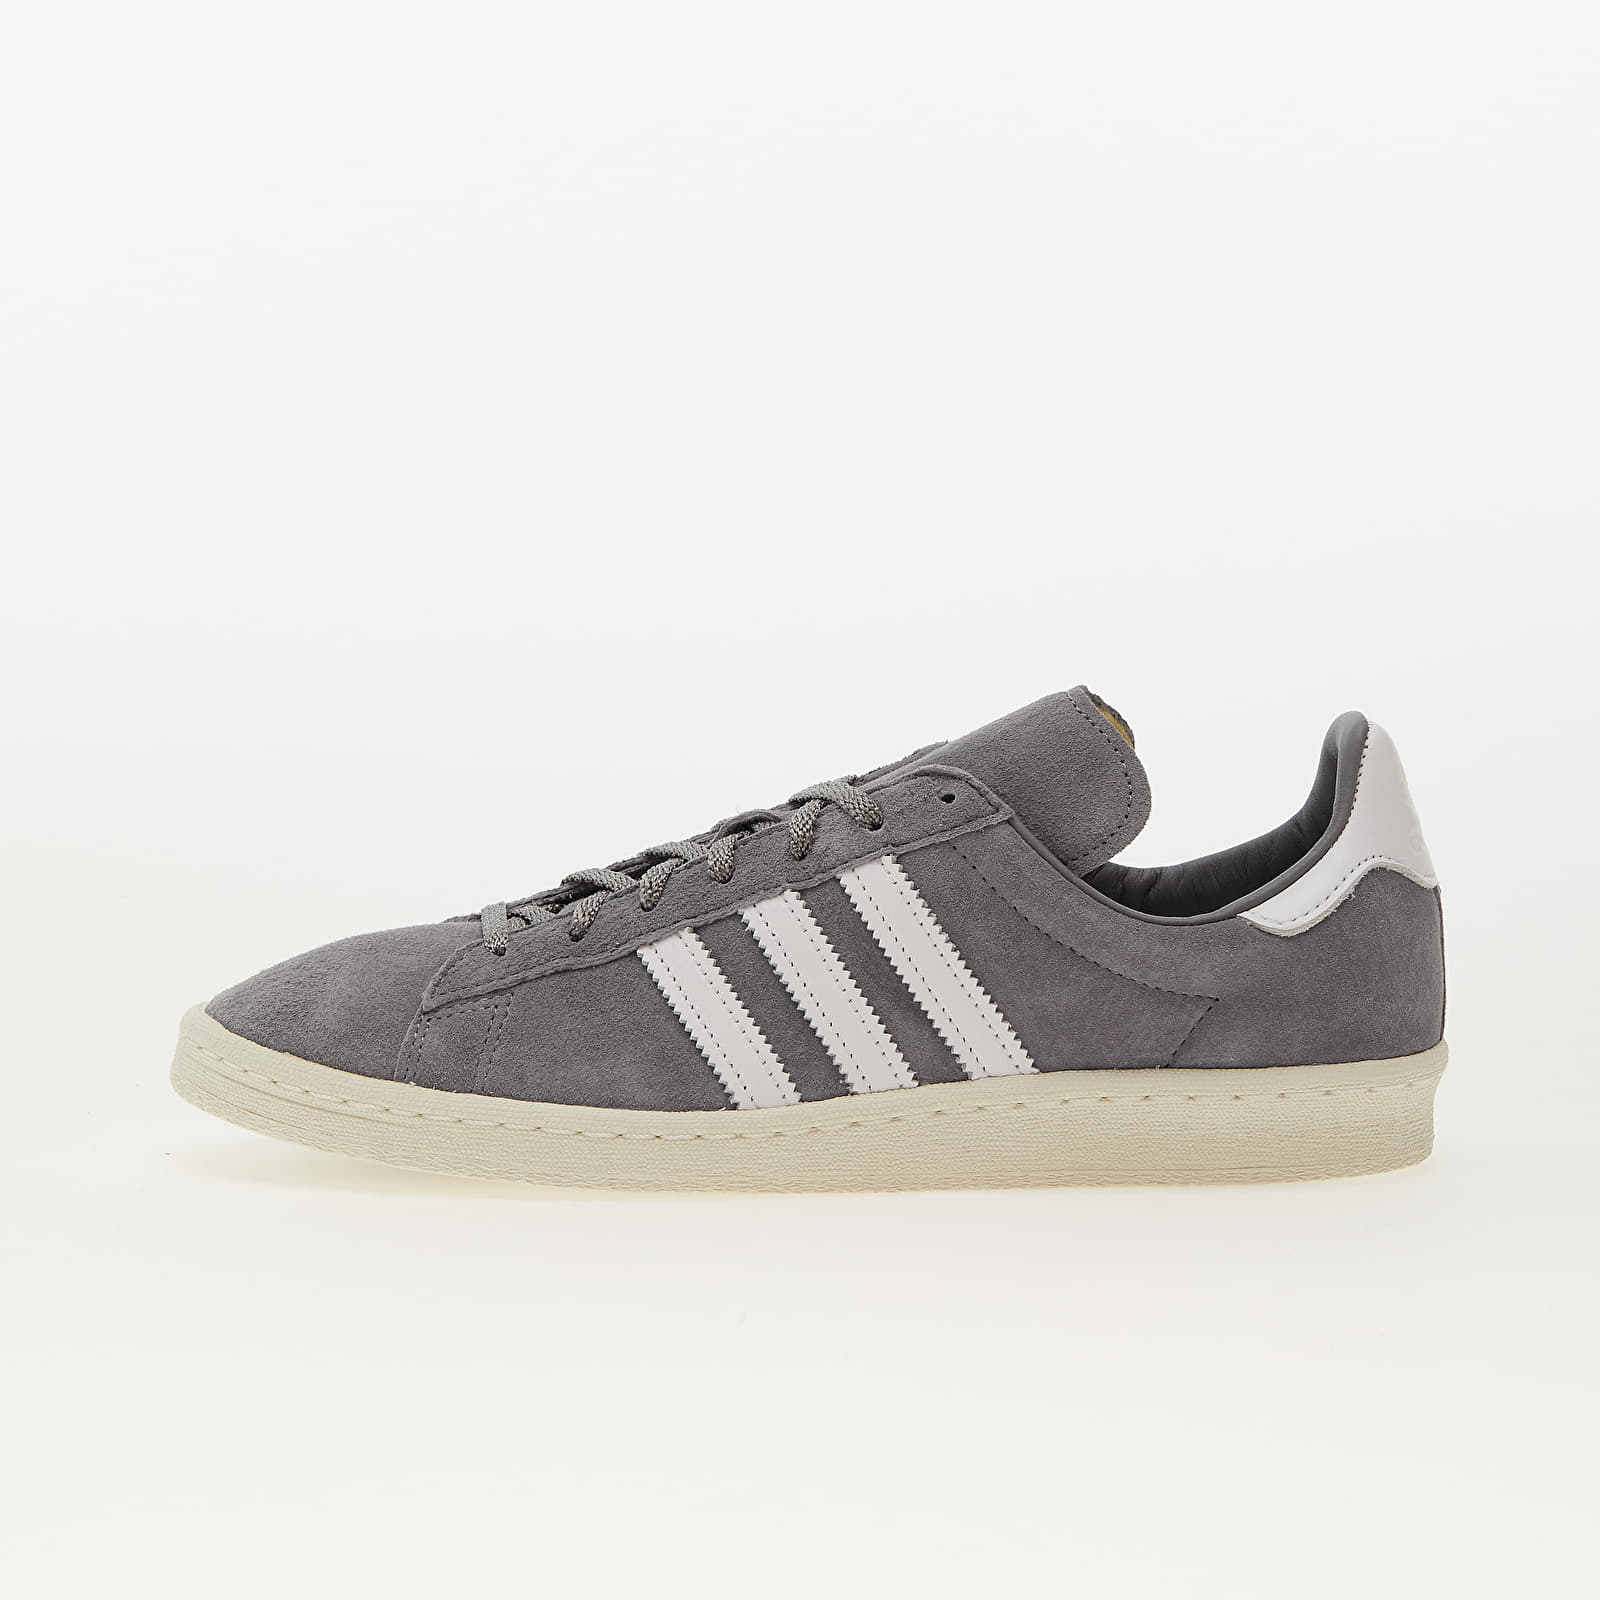 Men's shoes adidas Campus 80s Grey/ Ftw White/ Off White